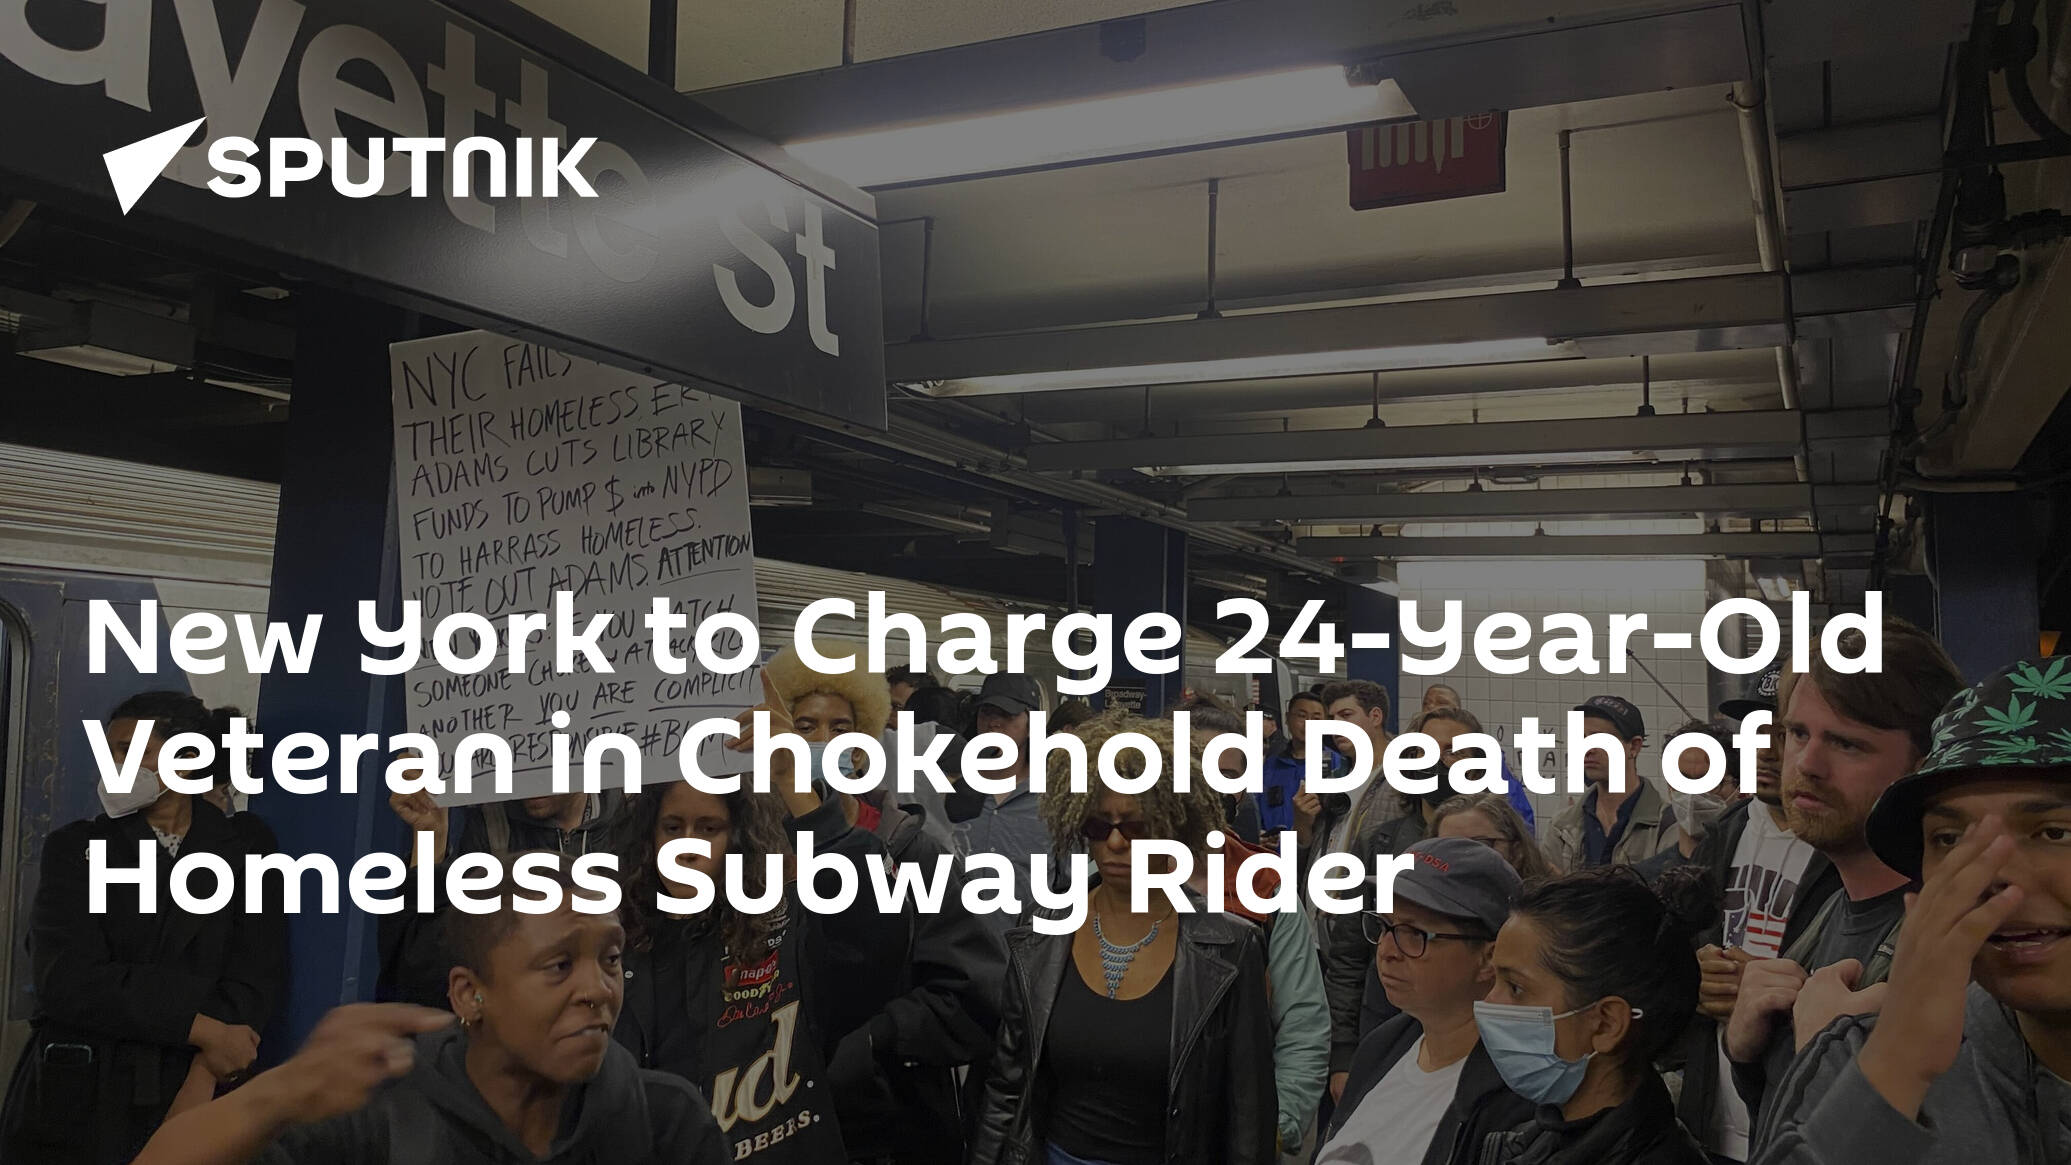 New York to Charge 24-Year-Old Veteran in Chokehold Death of Homeless Subway Rider